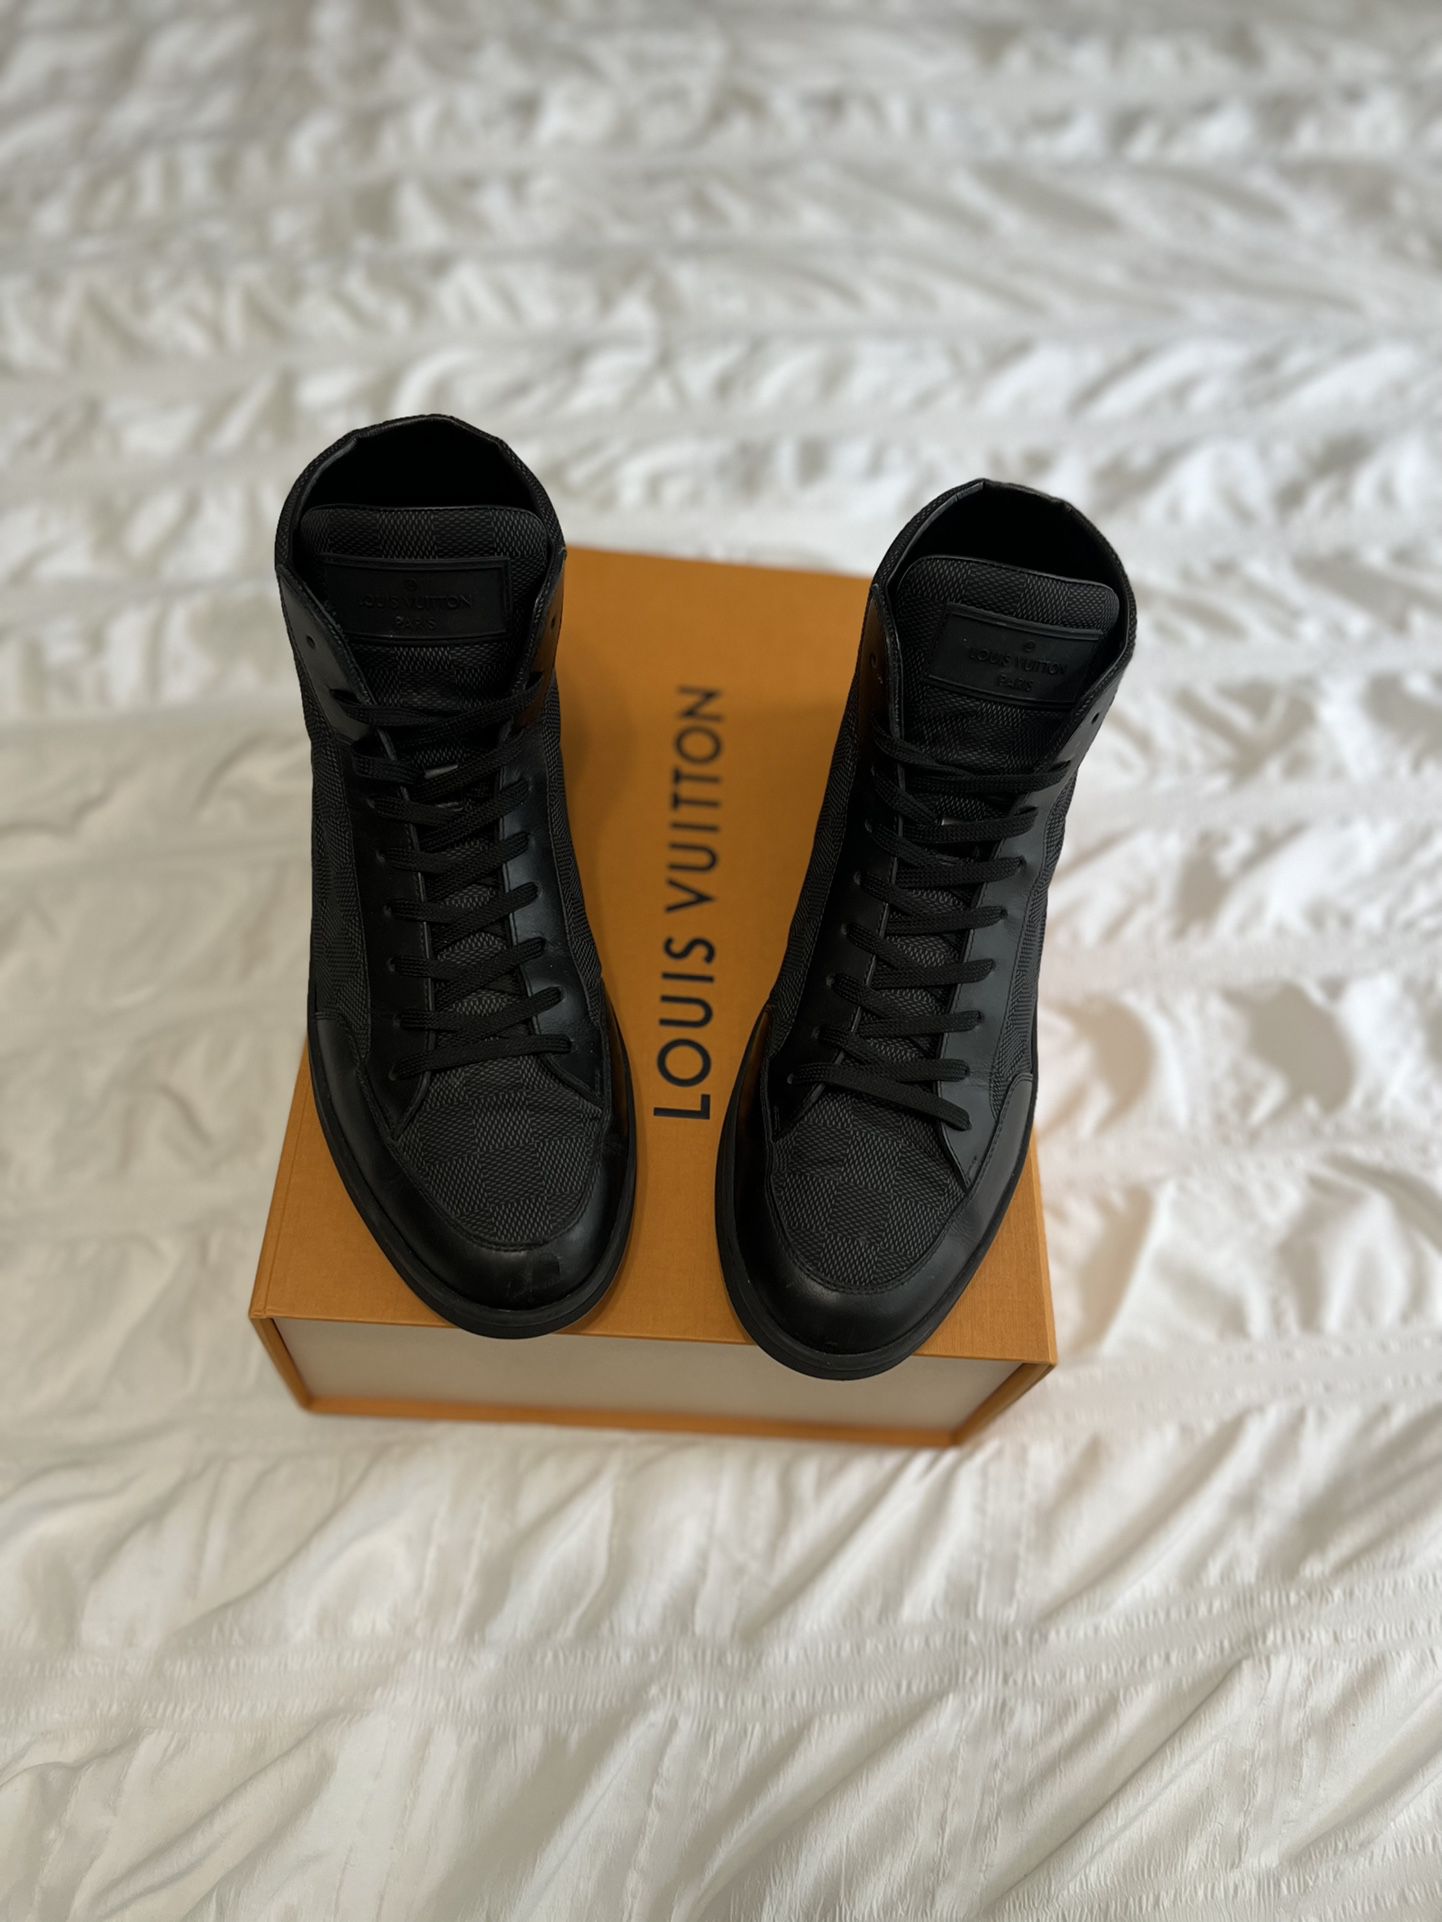 Louis Vuitton Mens Christian Lady's Clothing Chanel Sneakers Gucci Polo  Shirts Burberry Trunks Lv Shorts for Sale in Miami Beach, FL - OfferUp